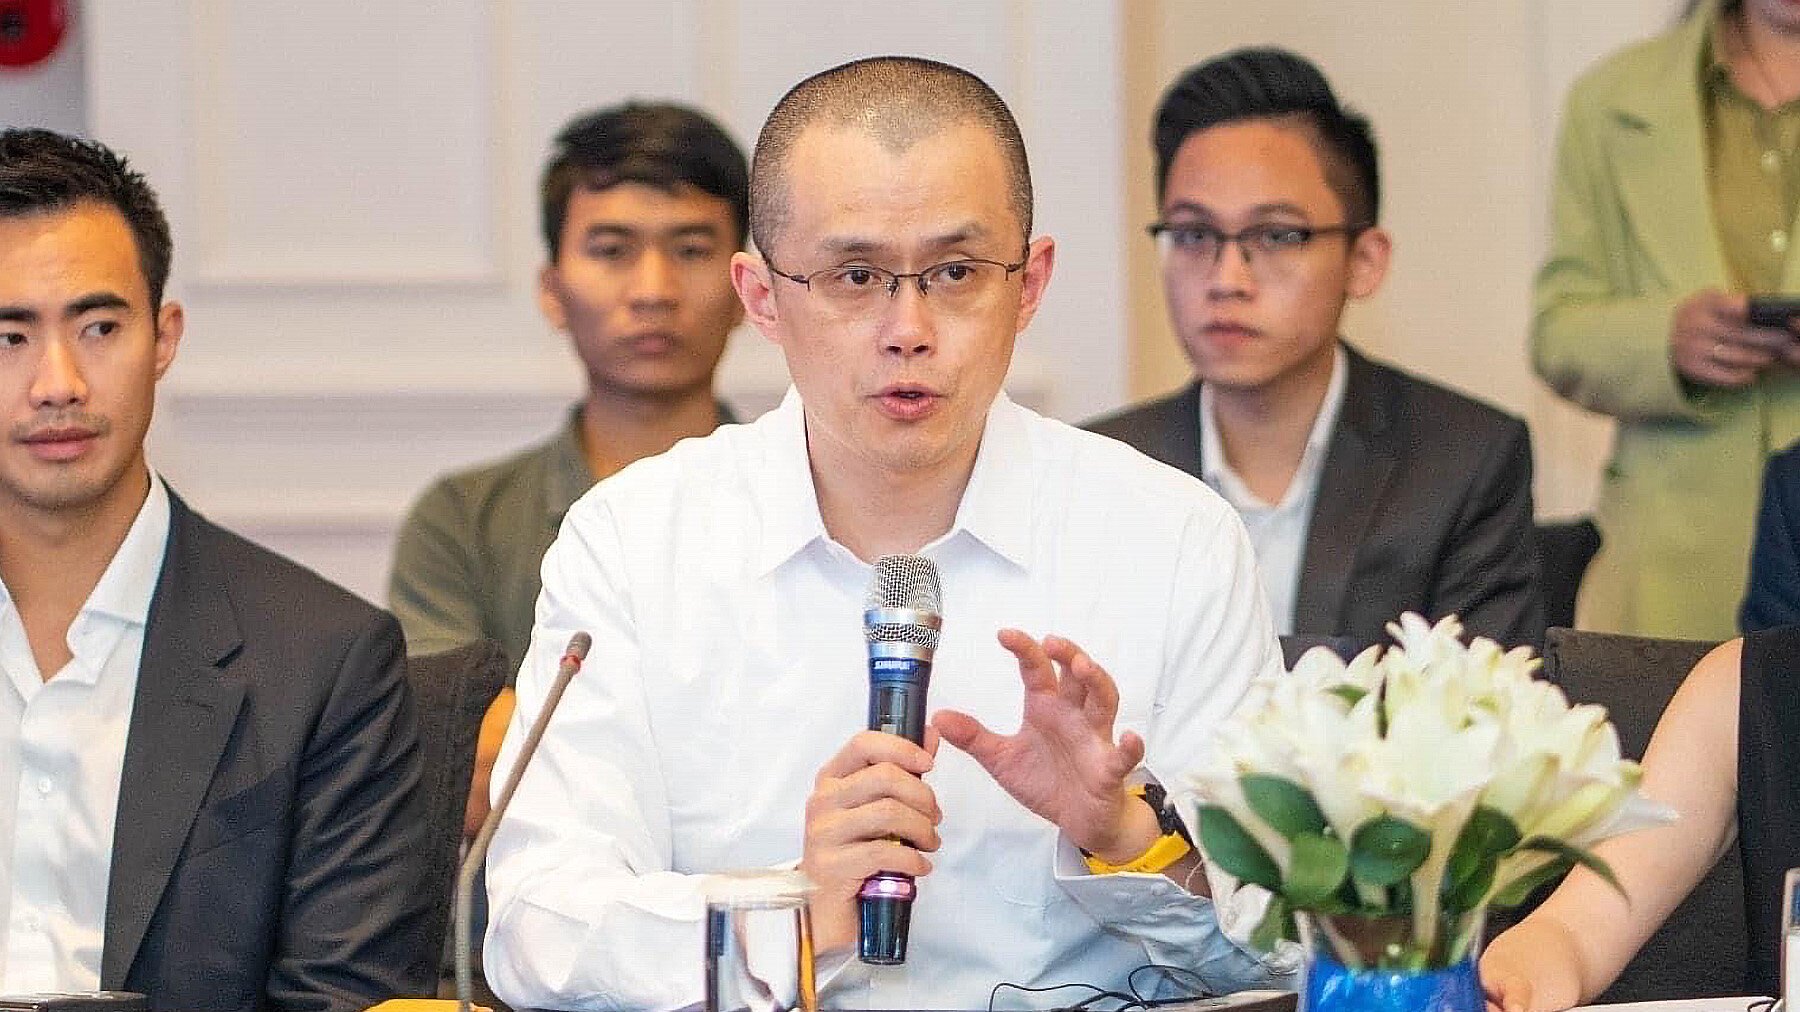 Binance Founder Changpeng Zhao Sentenced to 4 Months in Prison for Money Laundering Violations